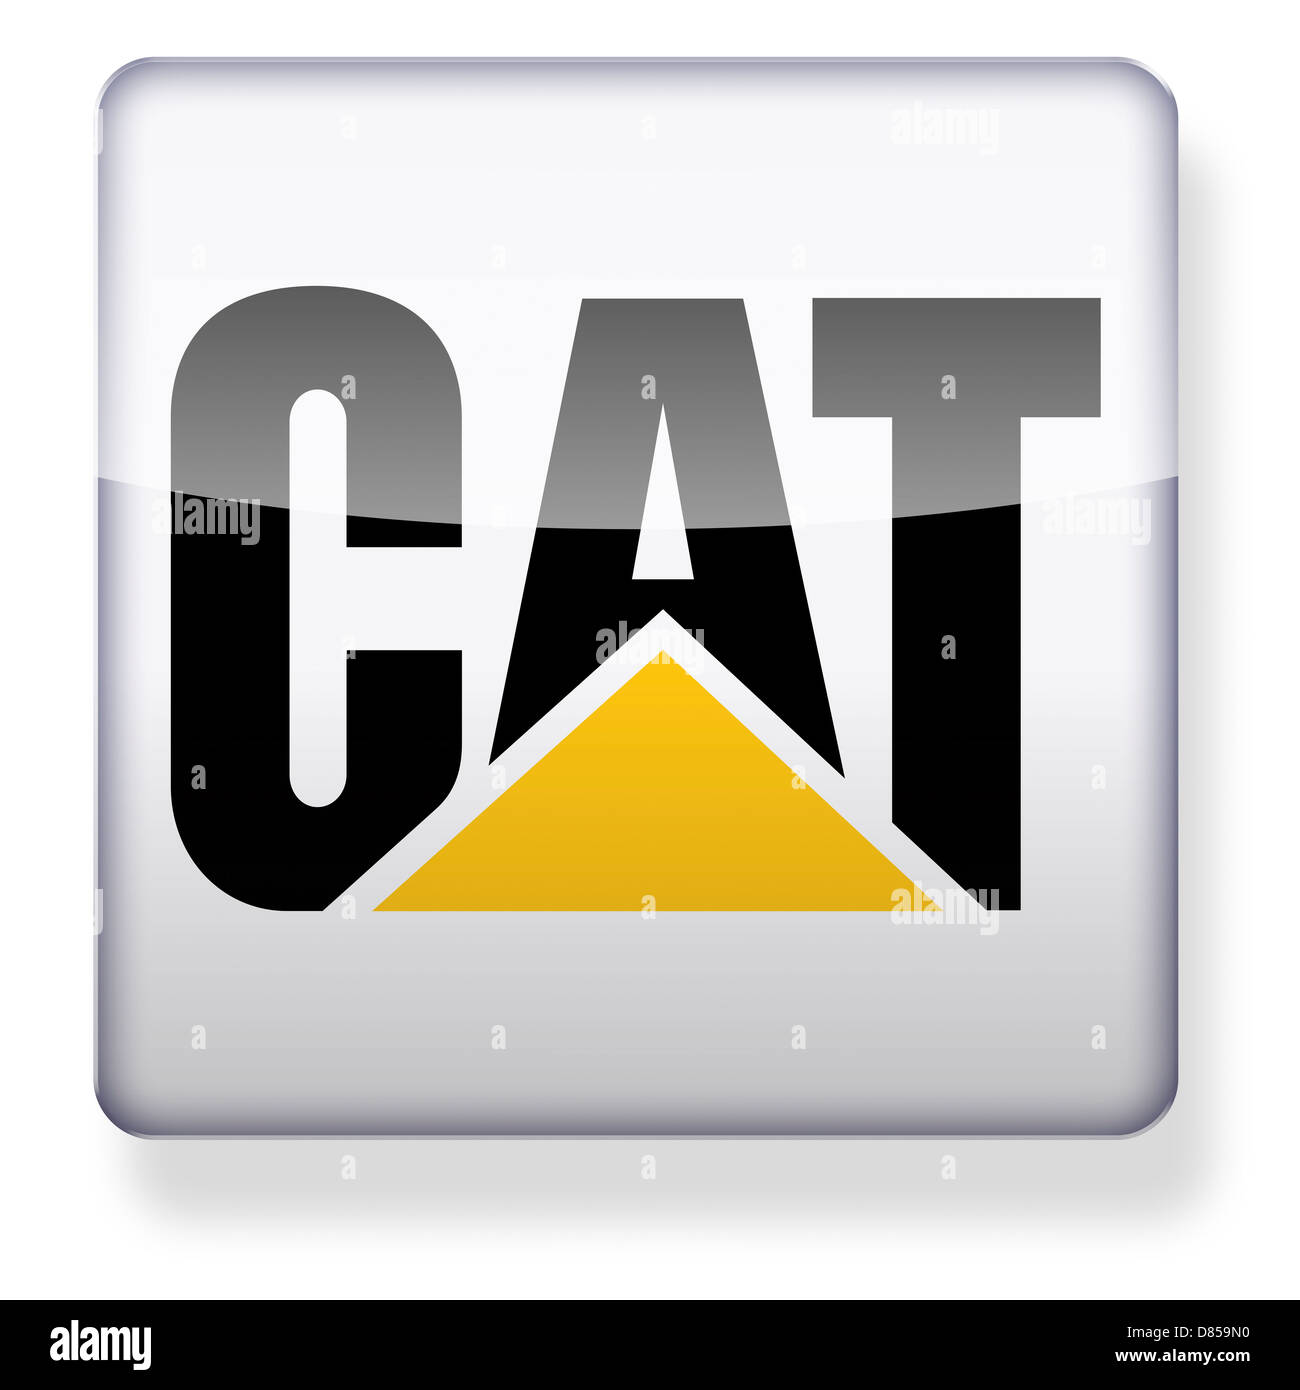 Caterpillar Inc. logo as an app icon. Clipping path included. Stock Photo